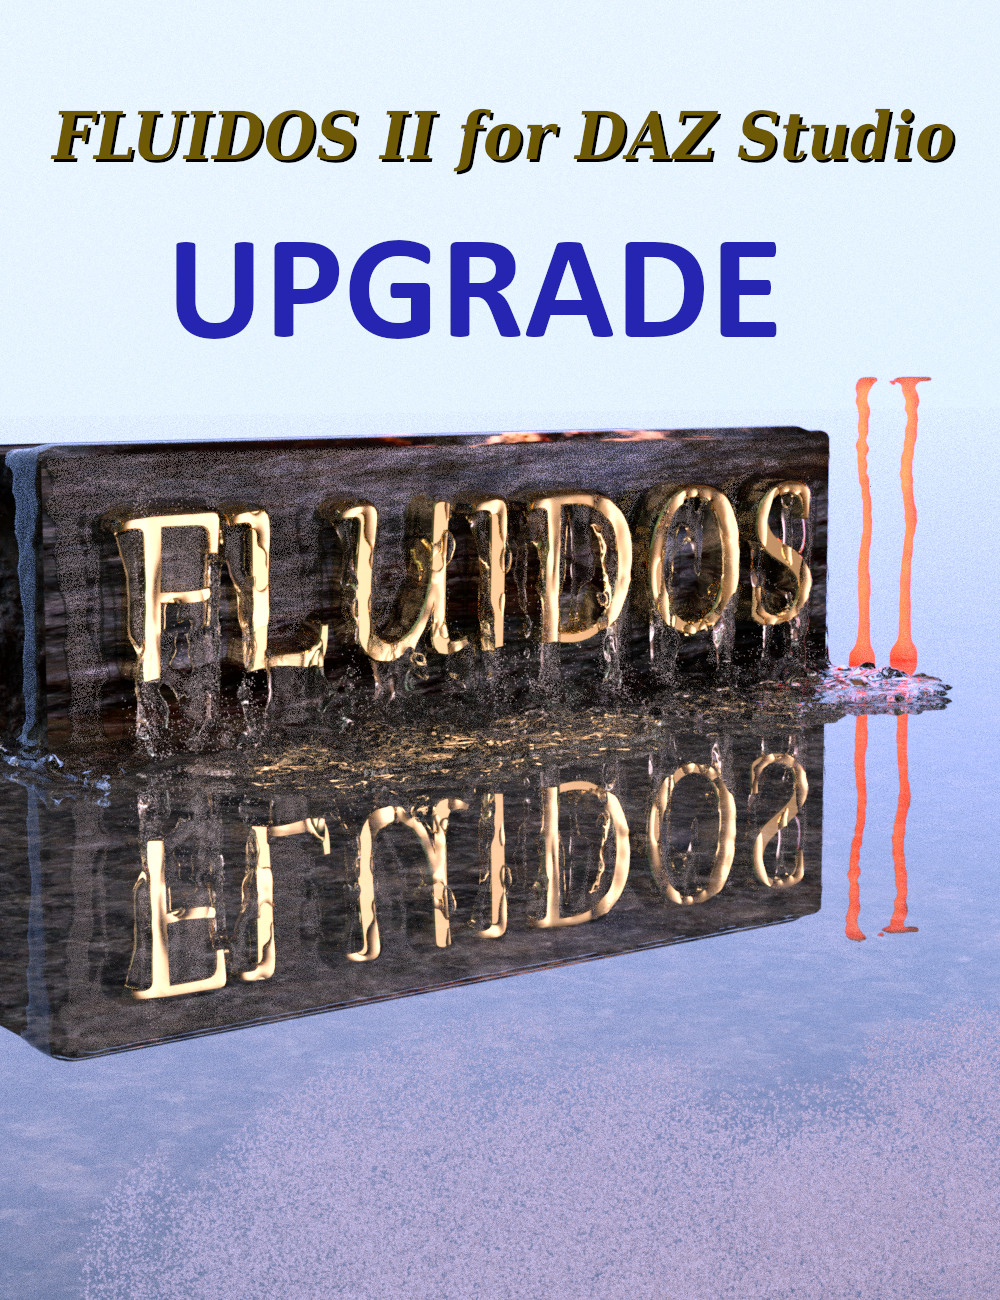 Fluidos II for Daz Studio - Upgrade from LITE edition by: Alvin Bemar, 3D Models by Daz 3D